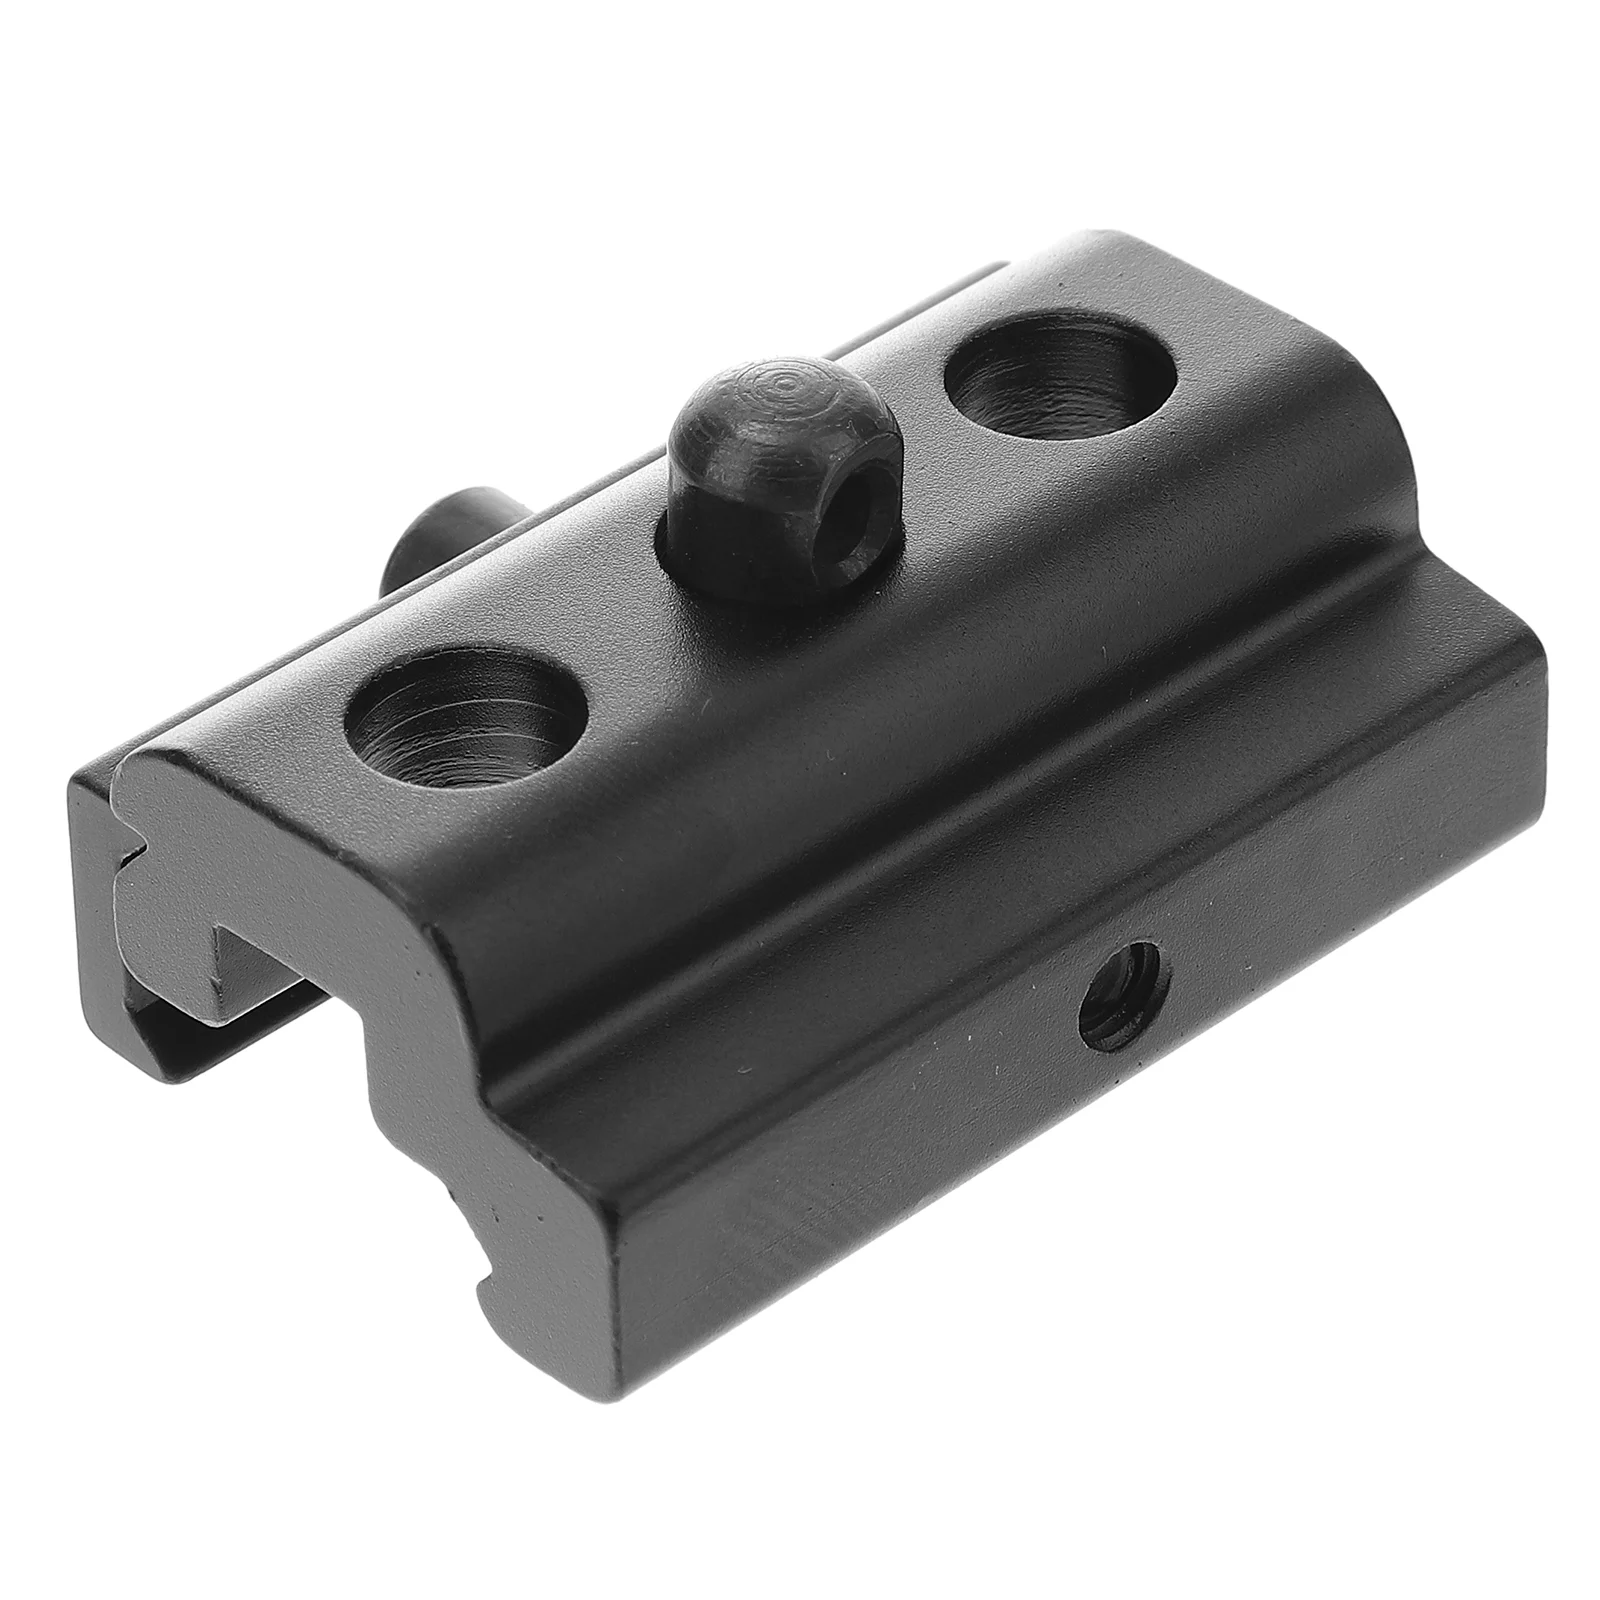 

Bipod Mount Adapter Attachment Quick Release Adapter fits 20mm Picatinny Rails for and Shooting